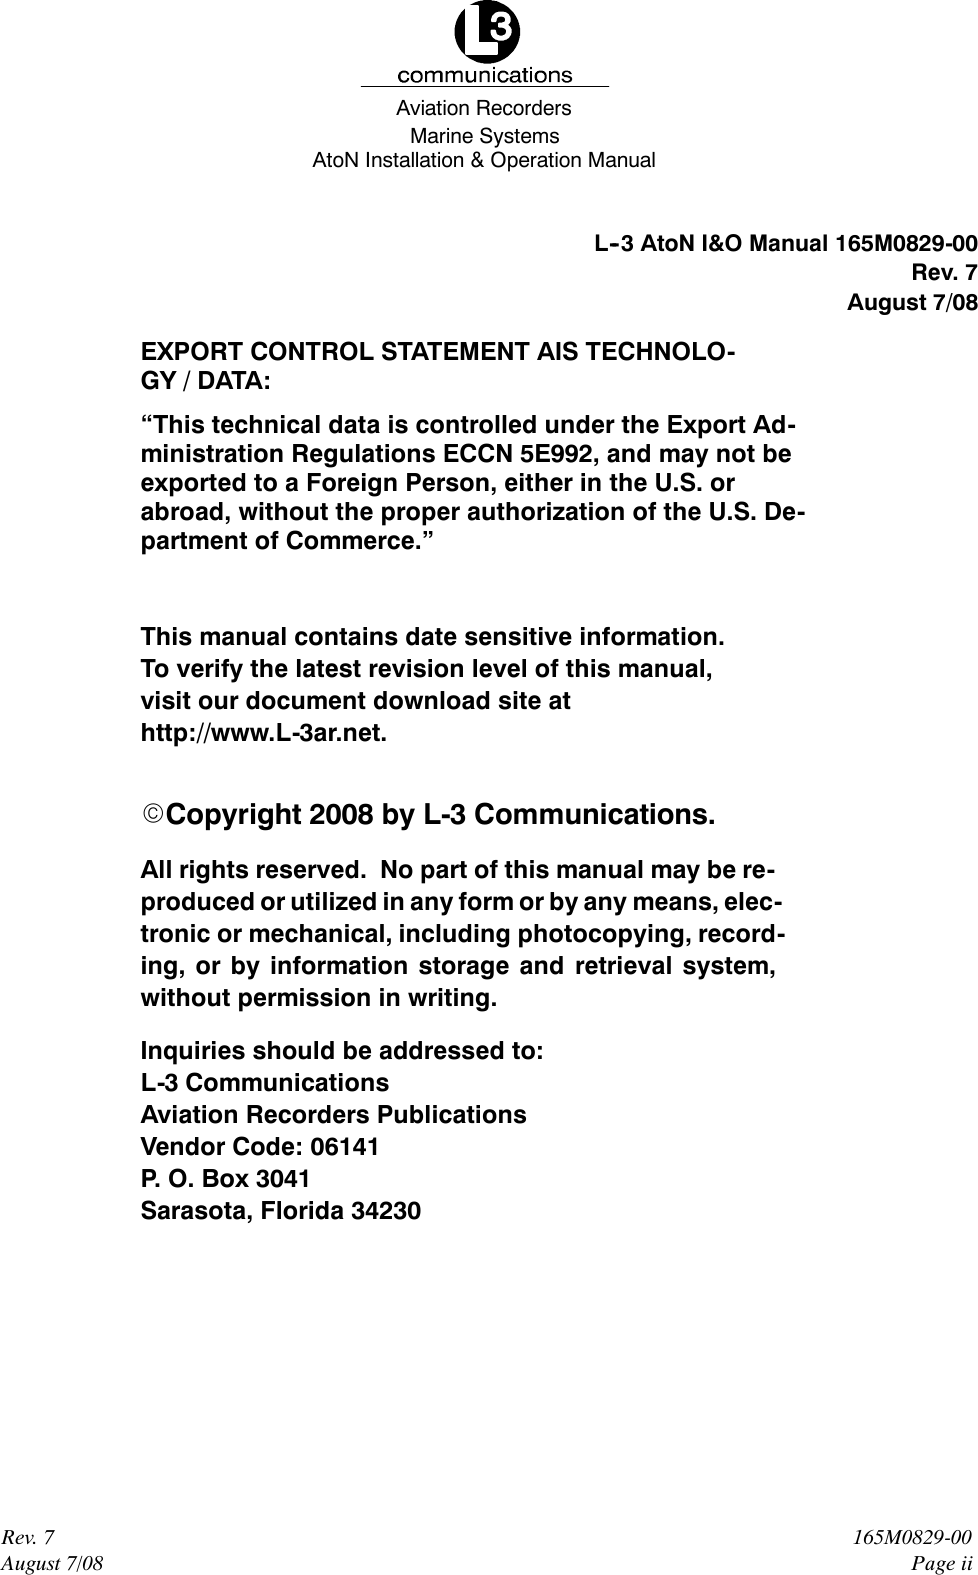 Marine SystemsAviation RecordersAtoN Installation &amp; Operation ManualRev. 7August 7/08165M0829-00Page iiL--3AtoN I&amp;O Manual 165M0829-00Rev. 7August 7/08EXPORT CONTROL STATEMENT AIS TECHNOLO-GY / DATA:“This technical data is controlled under the Export Ad-ministration Regulations ECCN 5E992, and may not beexported to a Foreign Person, either in the U.S. orabroad, without the proper authorization of the U.S. De-partment of Commerce.”This manual contains date sensitive information.To verify the latest revision level of this manual,visit our document download site athttp://www.L-3ar.net.ECopyright 2008 by L-3 Communications.All rights reserved. No part of this manual may be re-produced or utilized in any form or by any means, elec-tronic or mechanical, including photocopying, record-ing, or by information storage and retrieval system,without permission in writing.Inquiries should be addressed to:L-3 CommunicationsAviation Recorders PublicationsVendor Code: 06141P. O. Box 3041Sarasota, Florida 34230